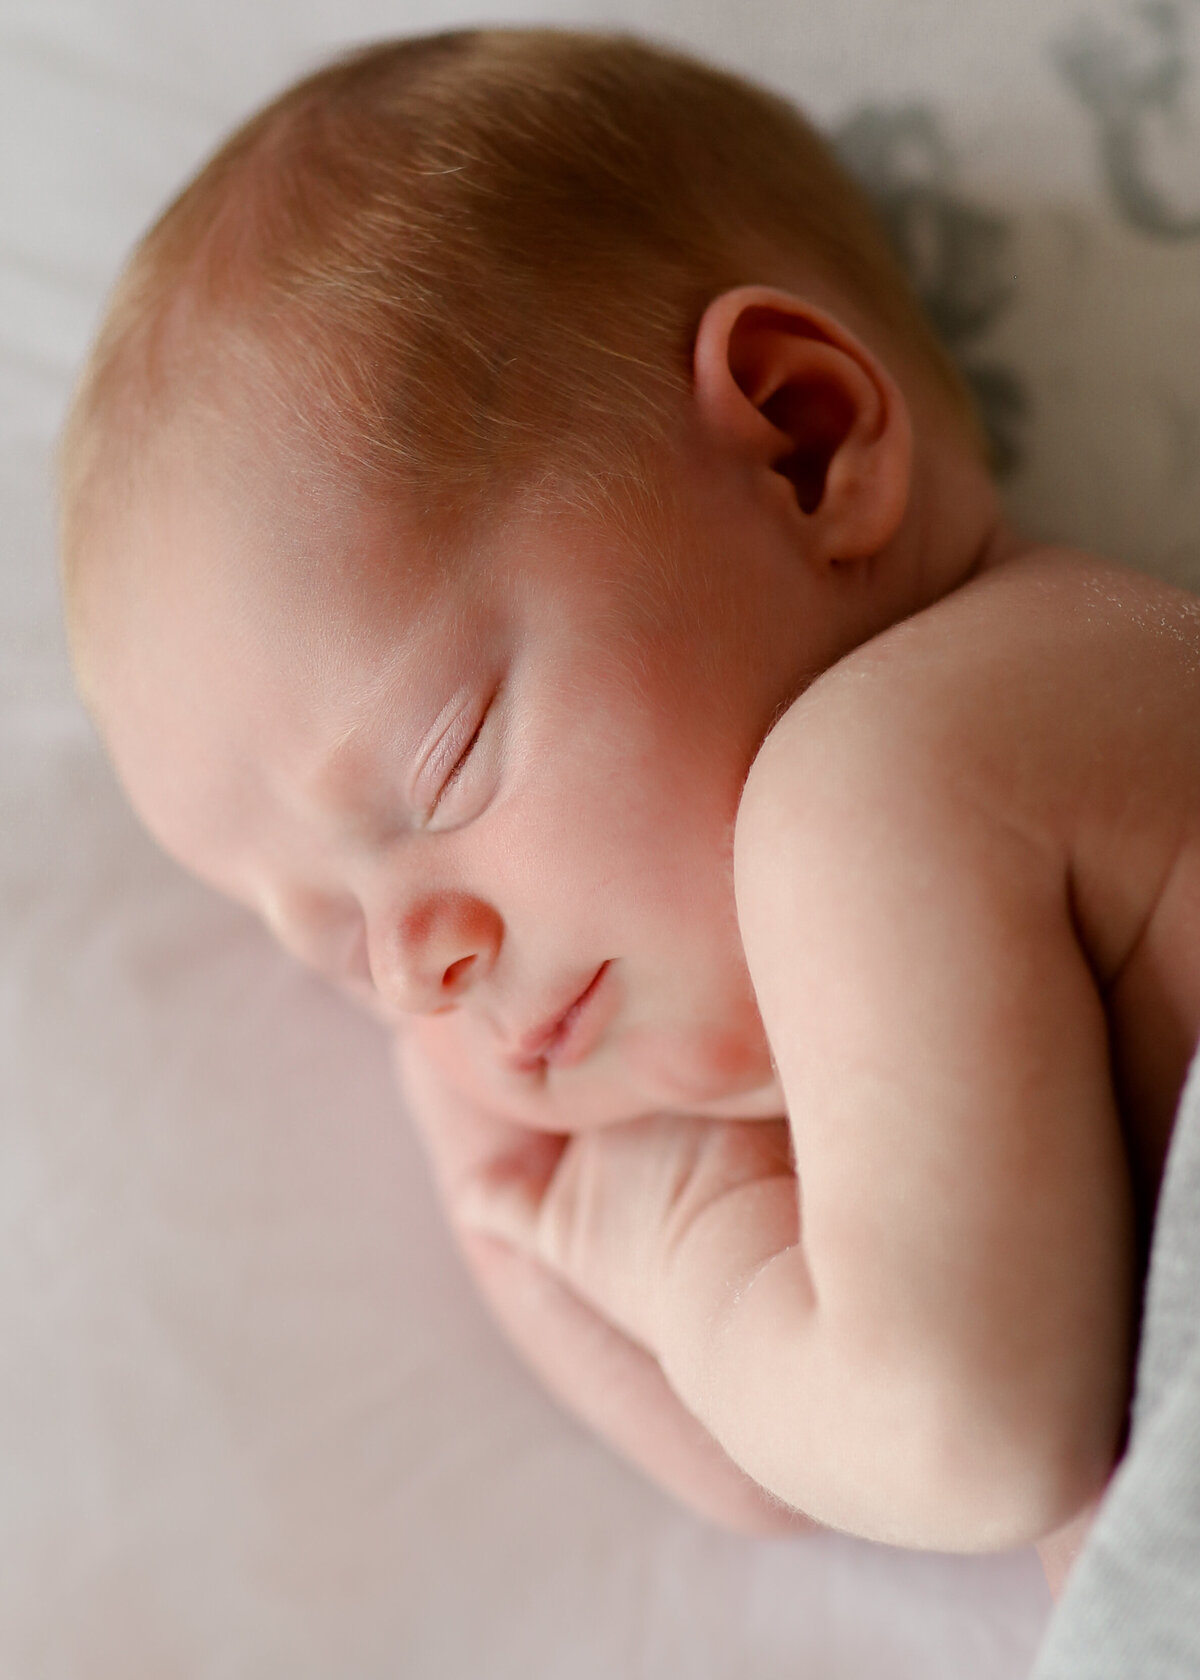 Taken by a leading newborn photographer covering Surrey & West Sussex